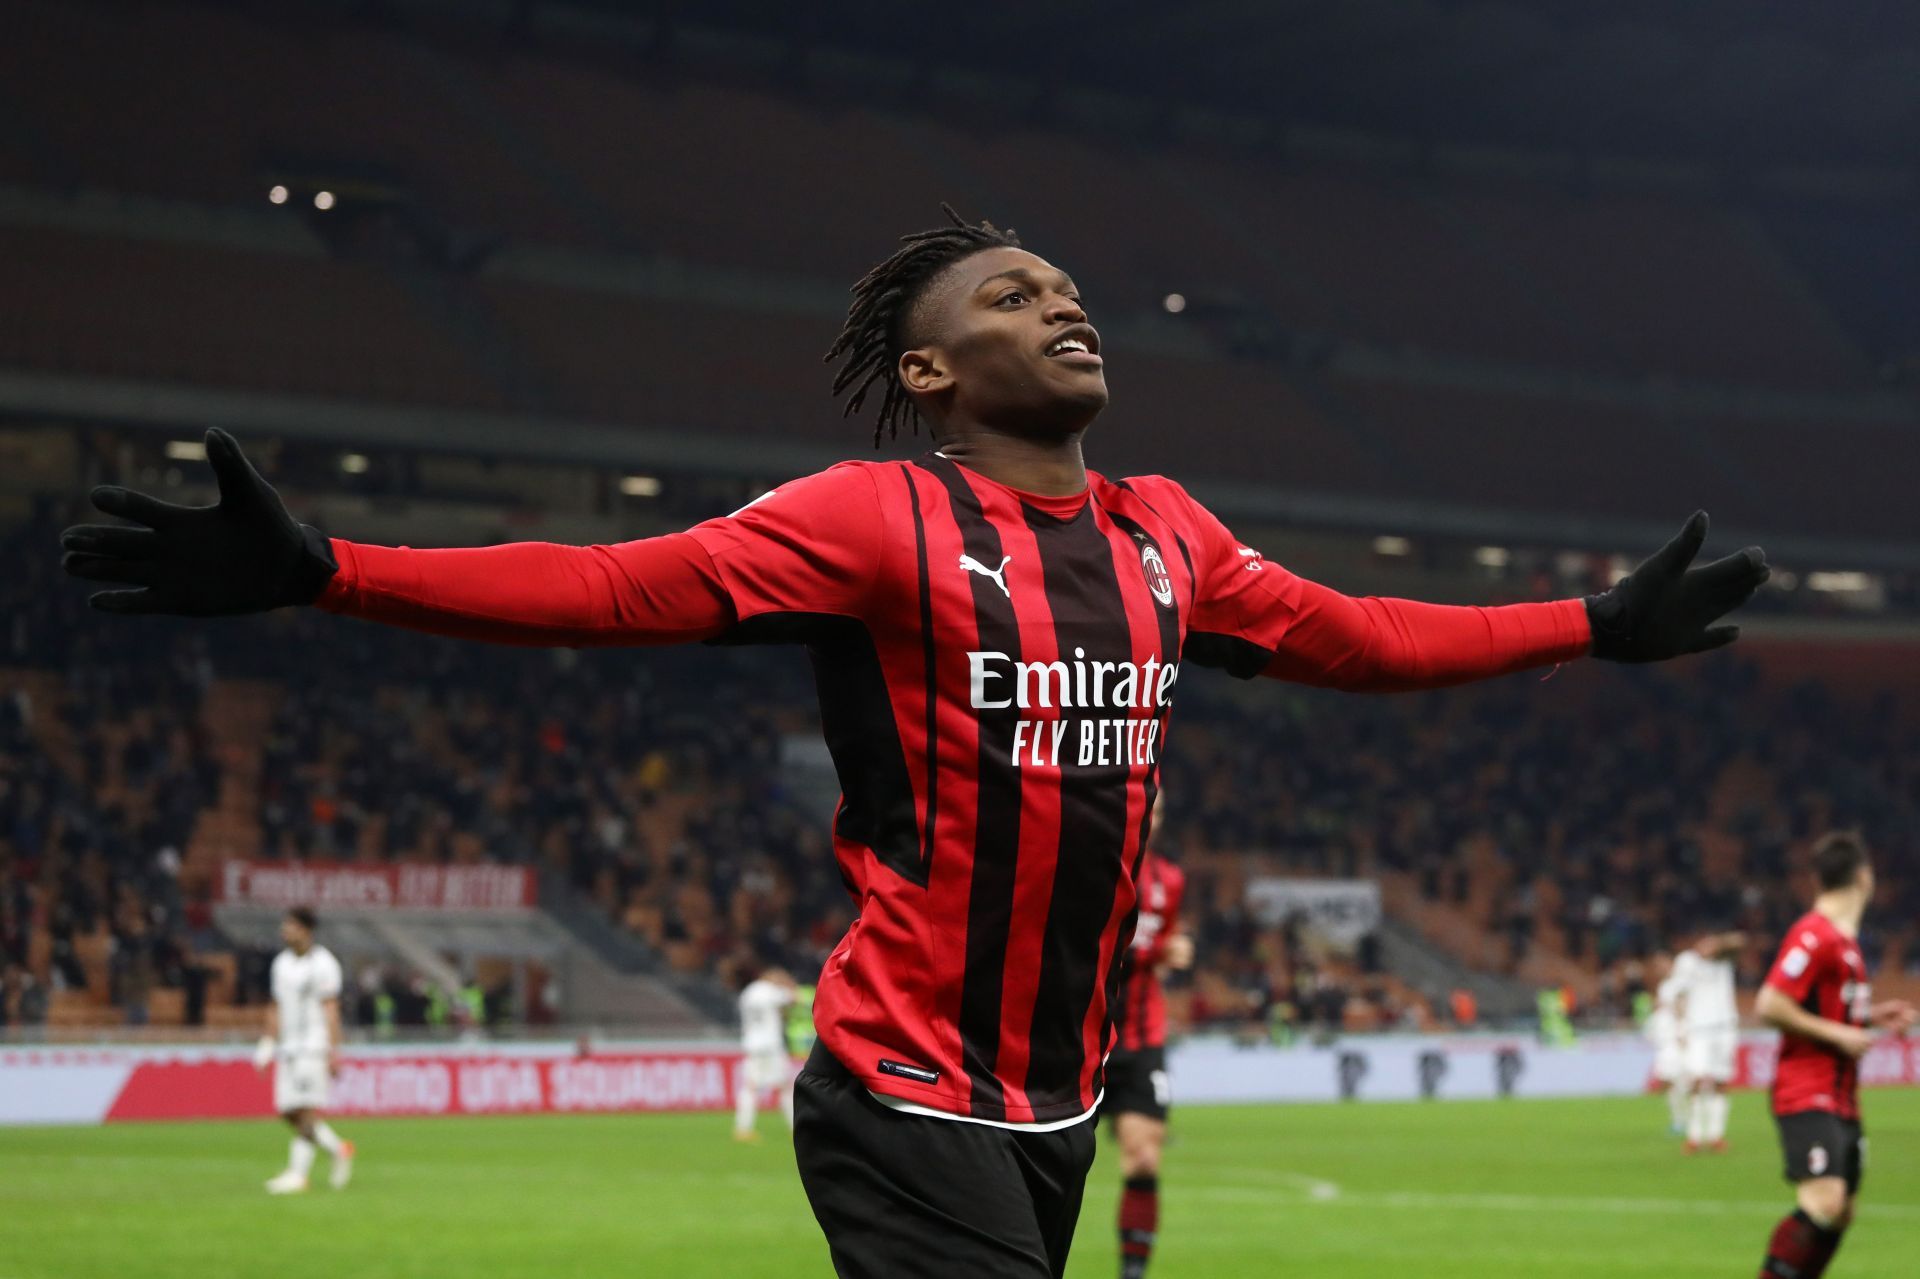 Rafael Leao has impressed with his performances for AC Milan